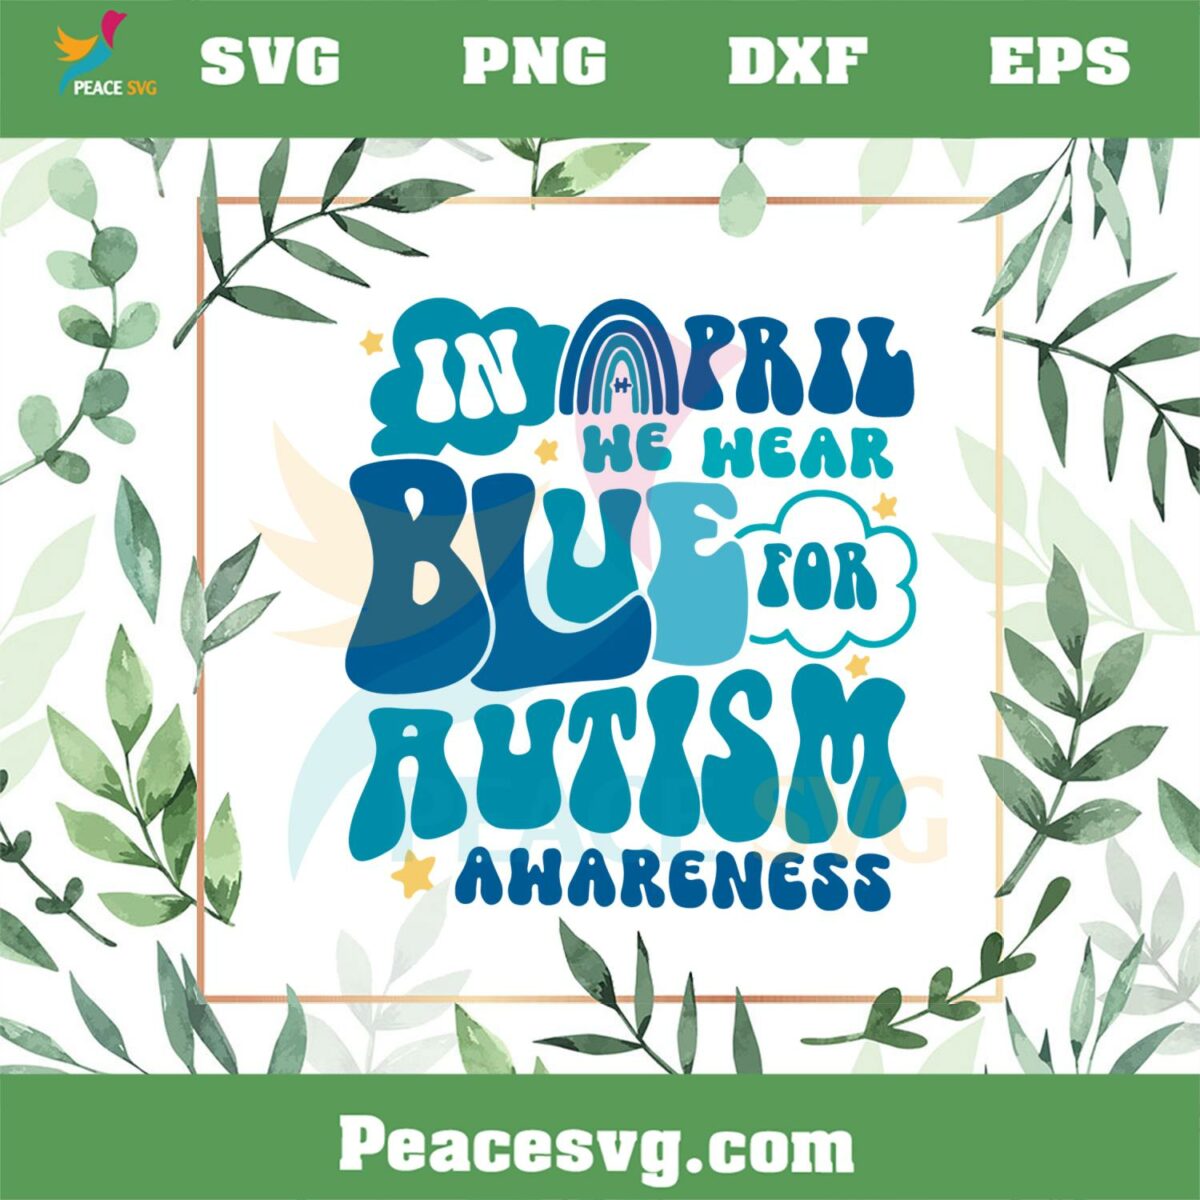 In April We Wear Blue For Autism Awareness Rainbow SVG Cutting Files